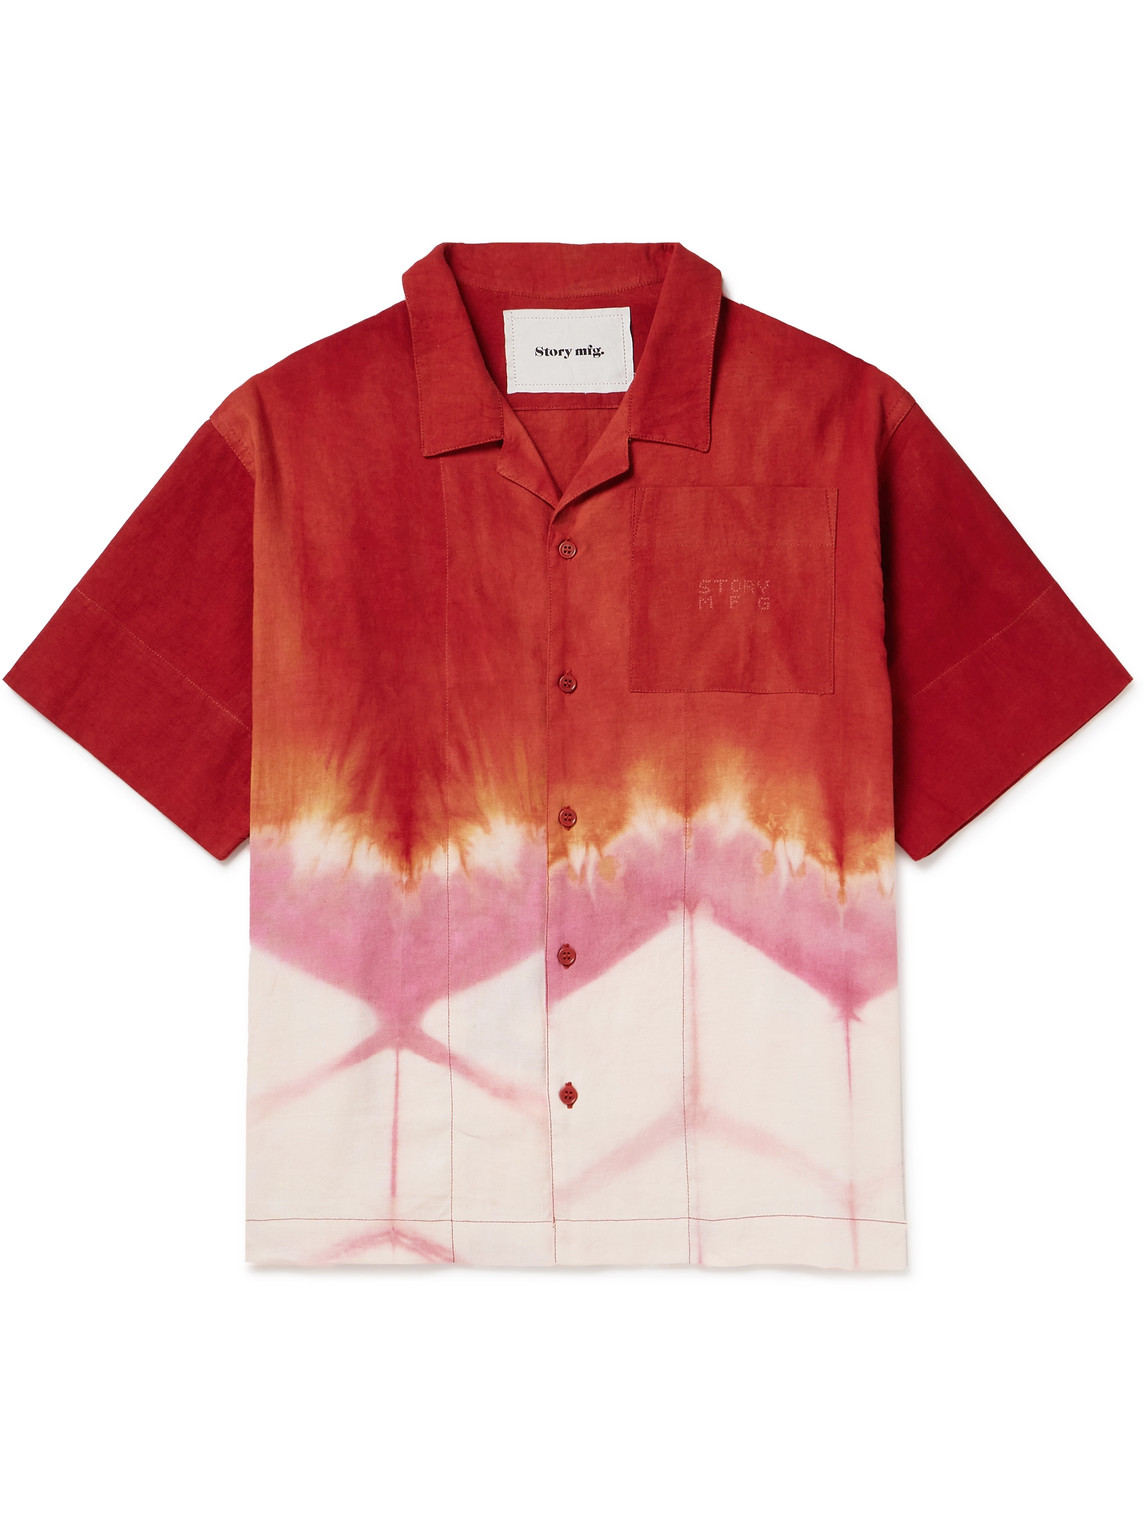 Story Mfg. - Greetings Camp-Collar Tie-Dyed Cotton and Linen-Blend Shirt - Men - Red - M von Story Mfg.